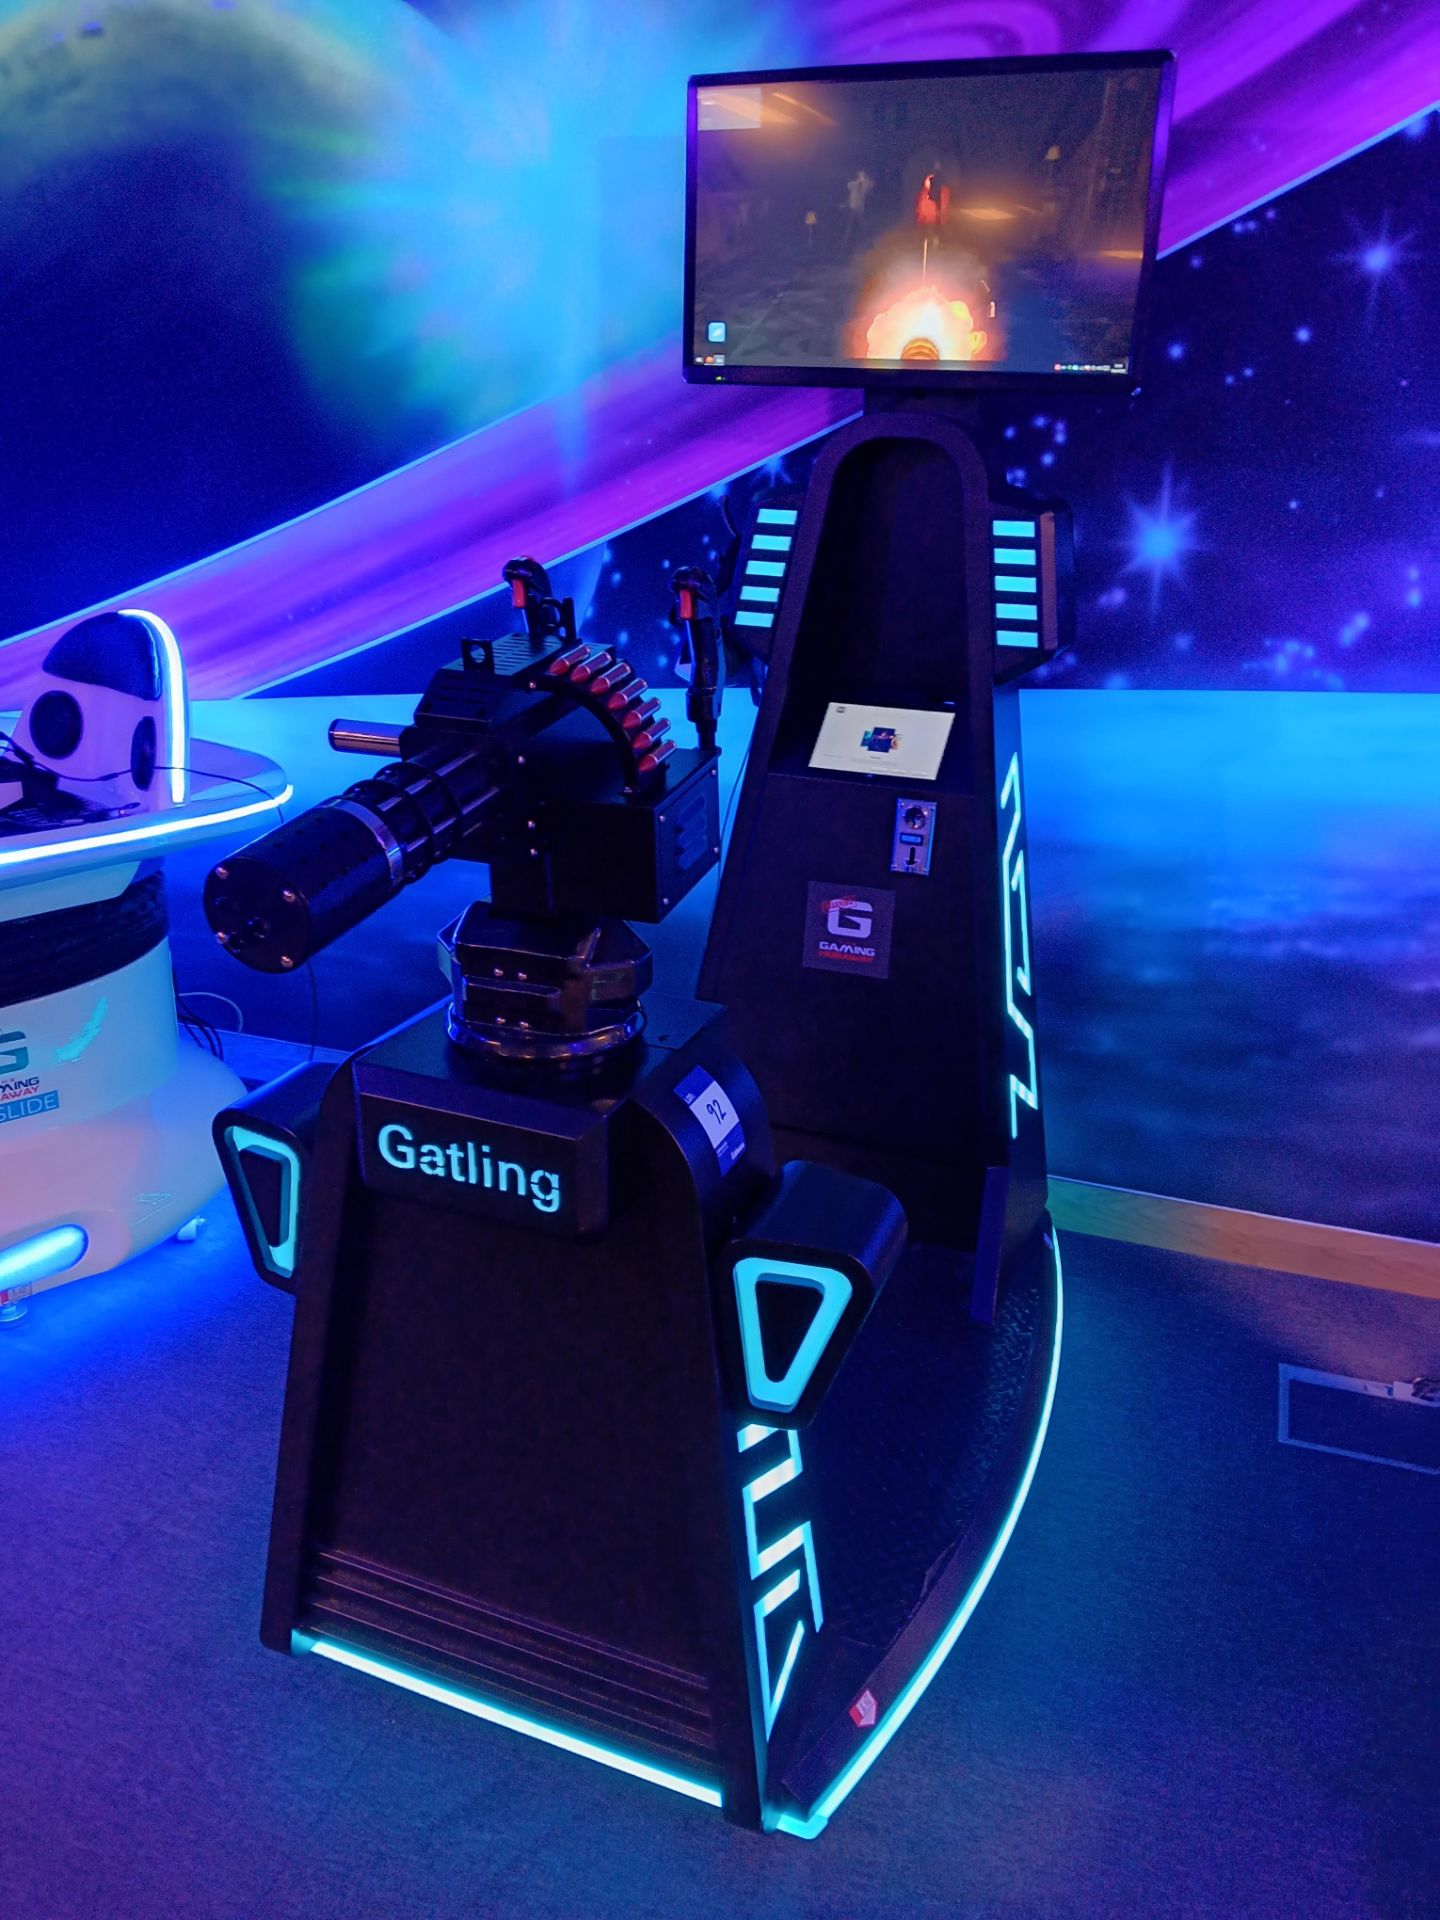 Movie Power VR Gatling Gun Shooting Simulator – Cost New £9,000 - Buyer to Disconnect & remove - Image 2 of 6